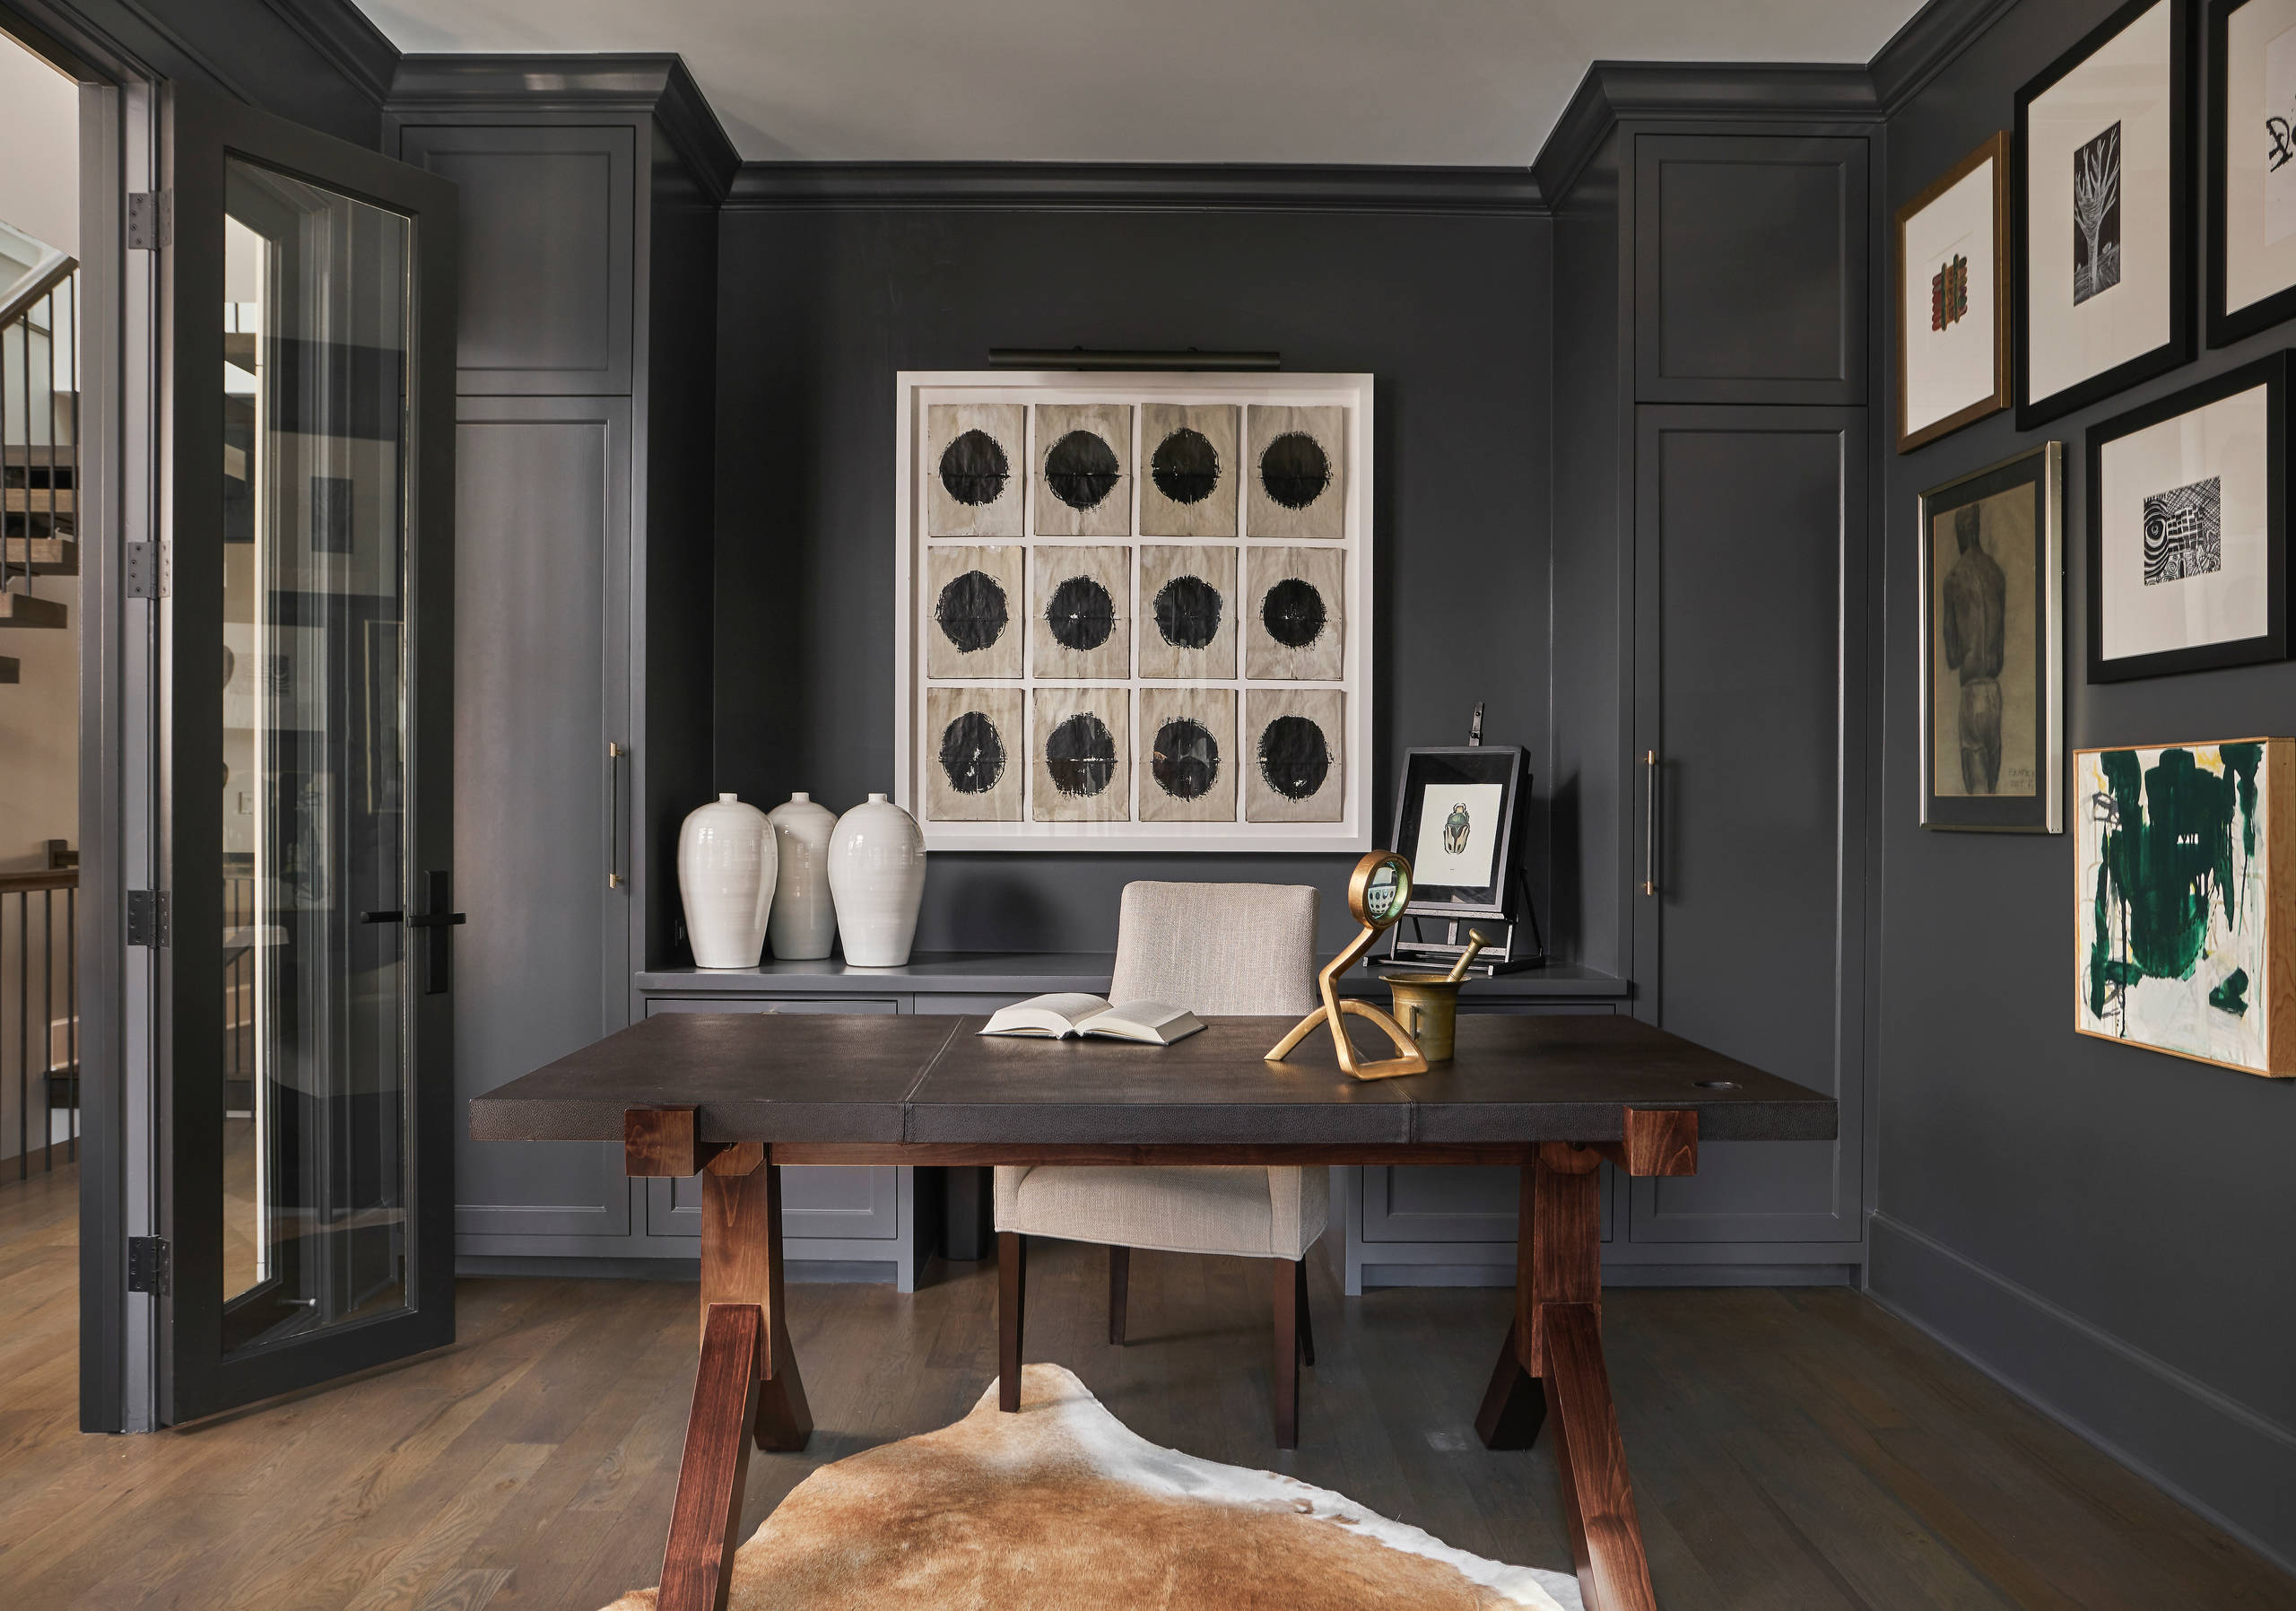 11 Chic Desk Decor Ideas For a More Inspired Workspace (And Home), Havenly  Blog